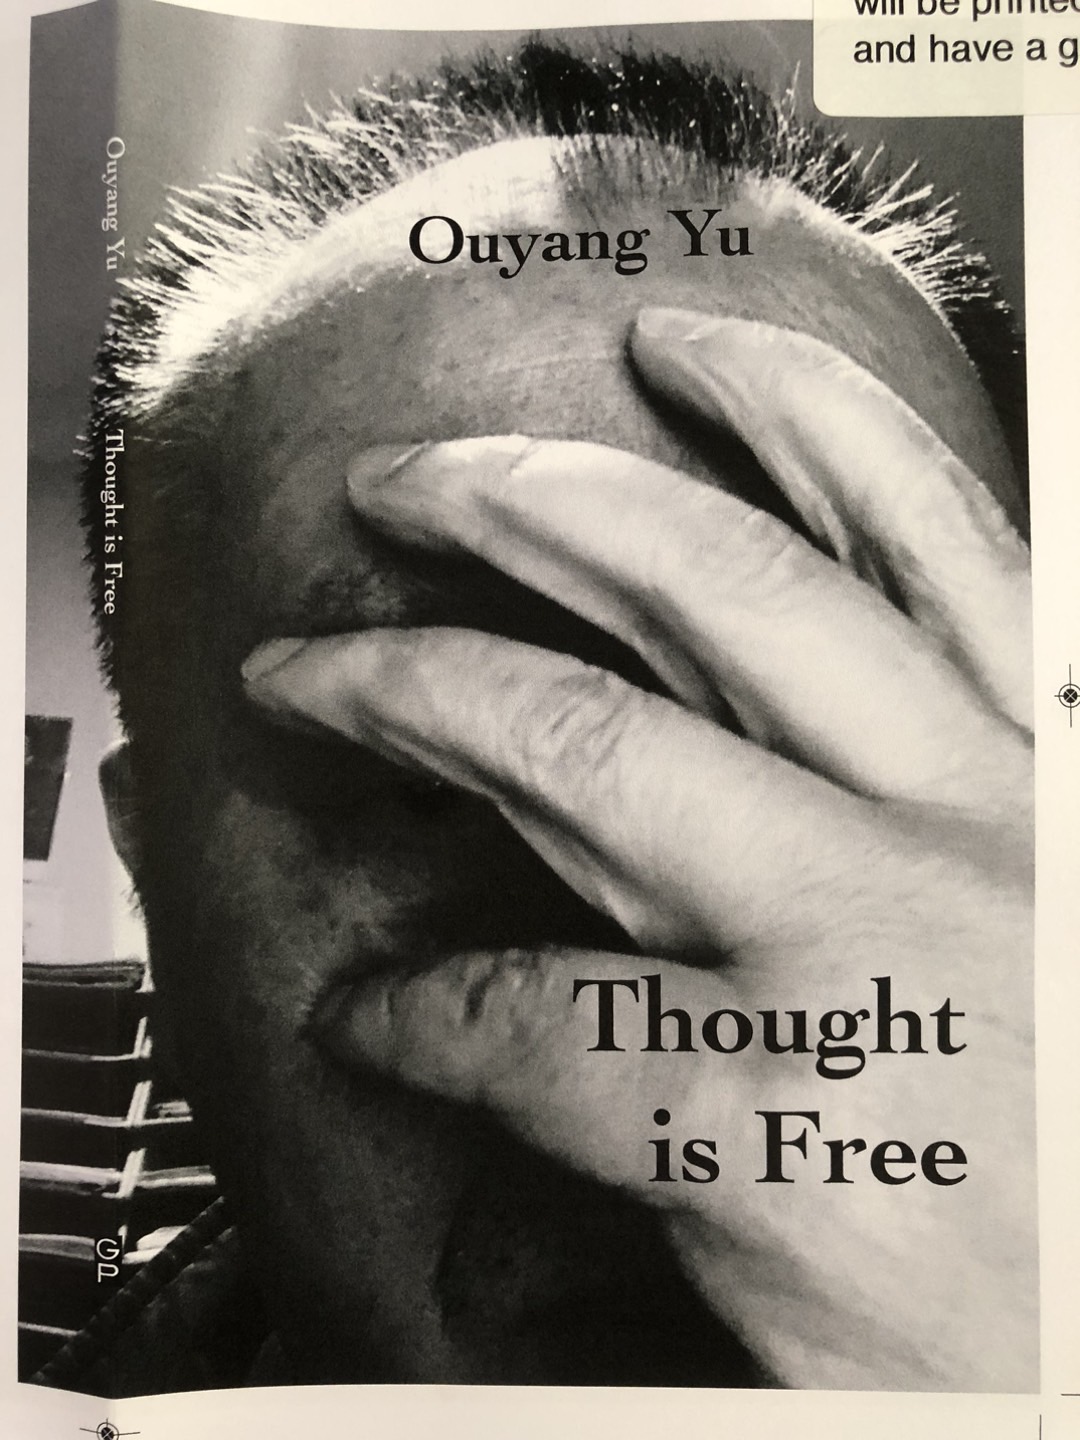 Thought is Free, a book of pen-notes nonfiction, coming out shortly